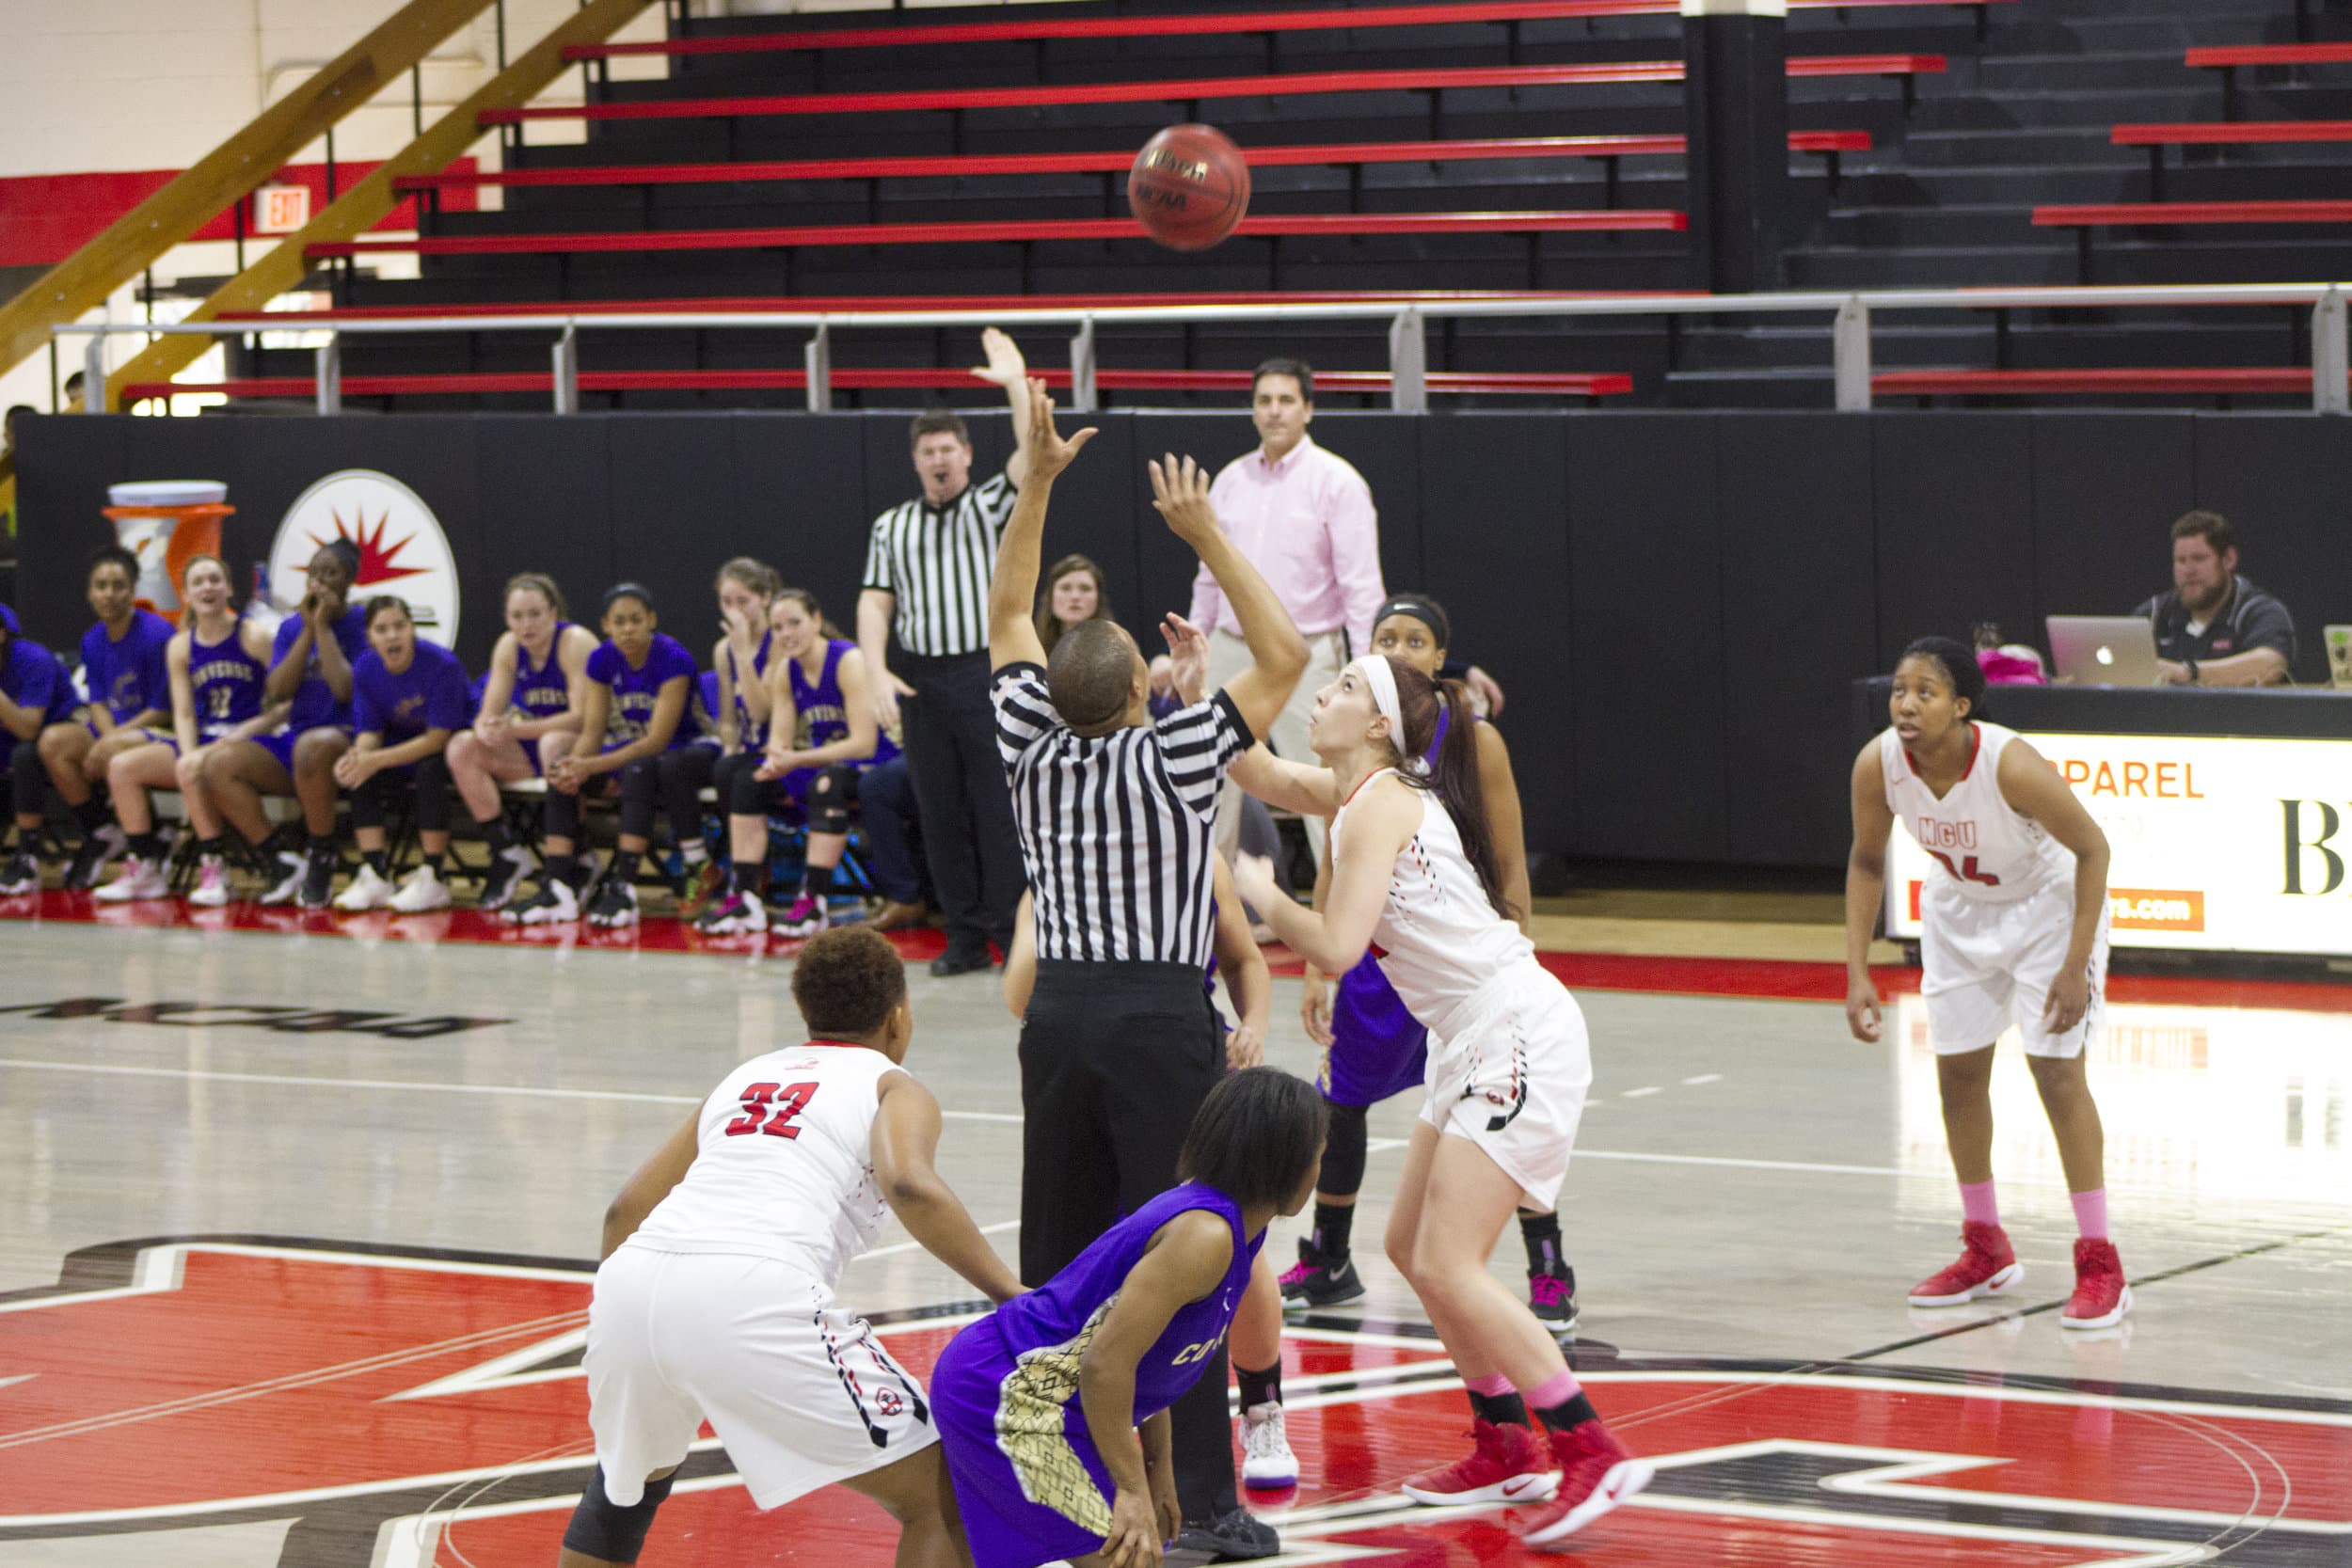 Elizabeth Trentham goes up for the ball at the tipoff of the Lady Crusaders' matchup against Converse College last Wednesday.